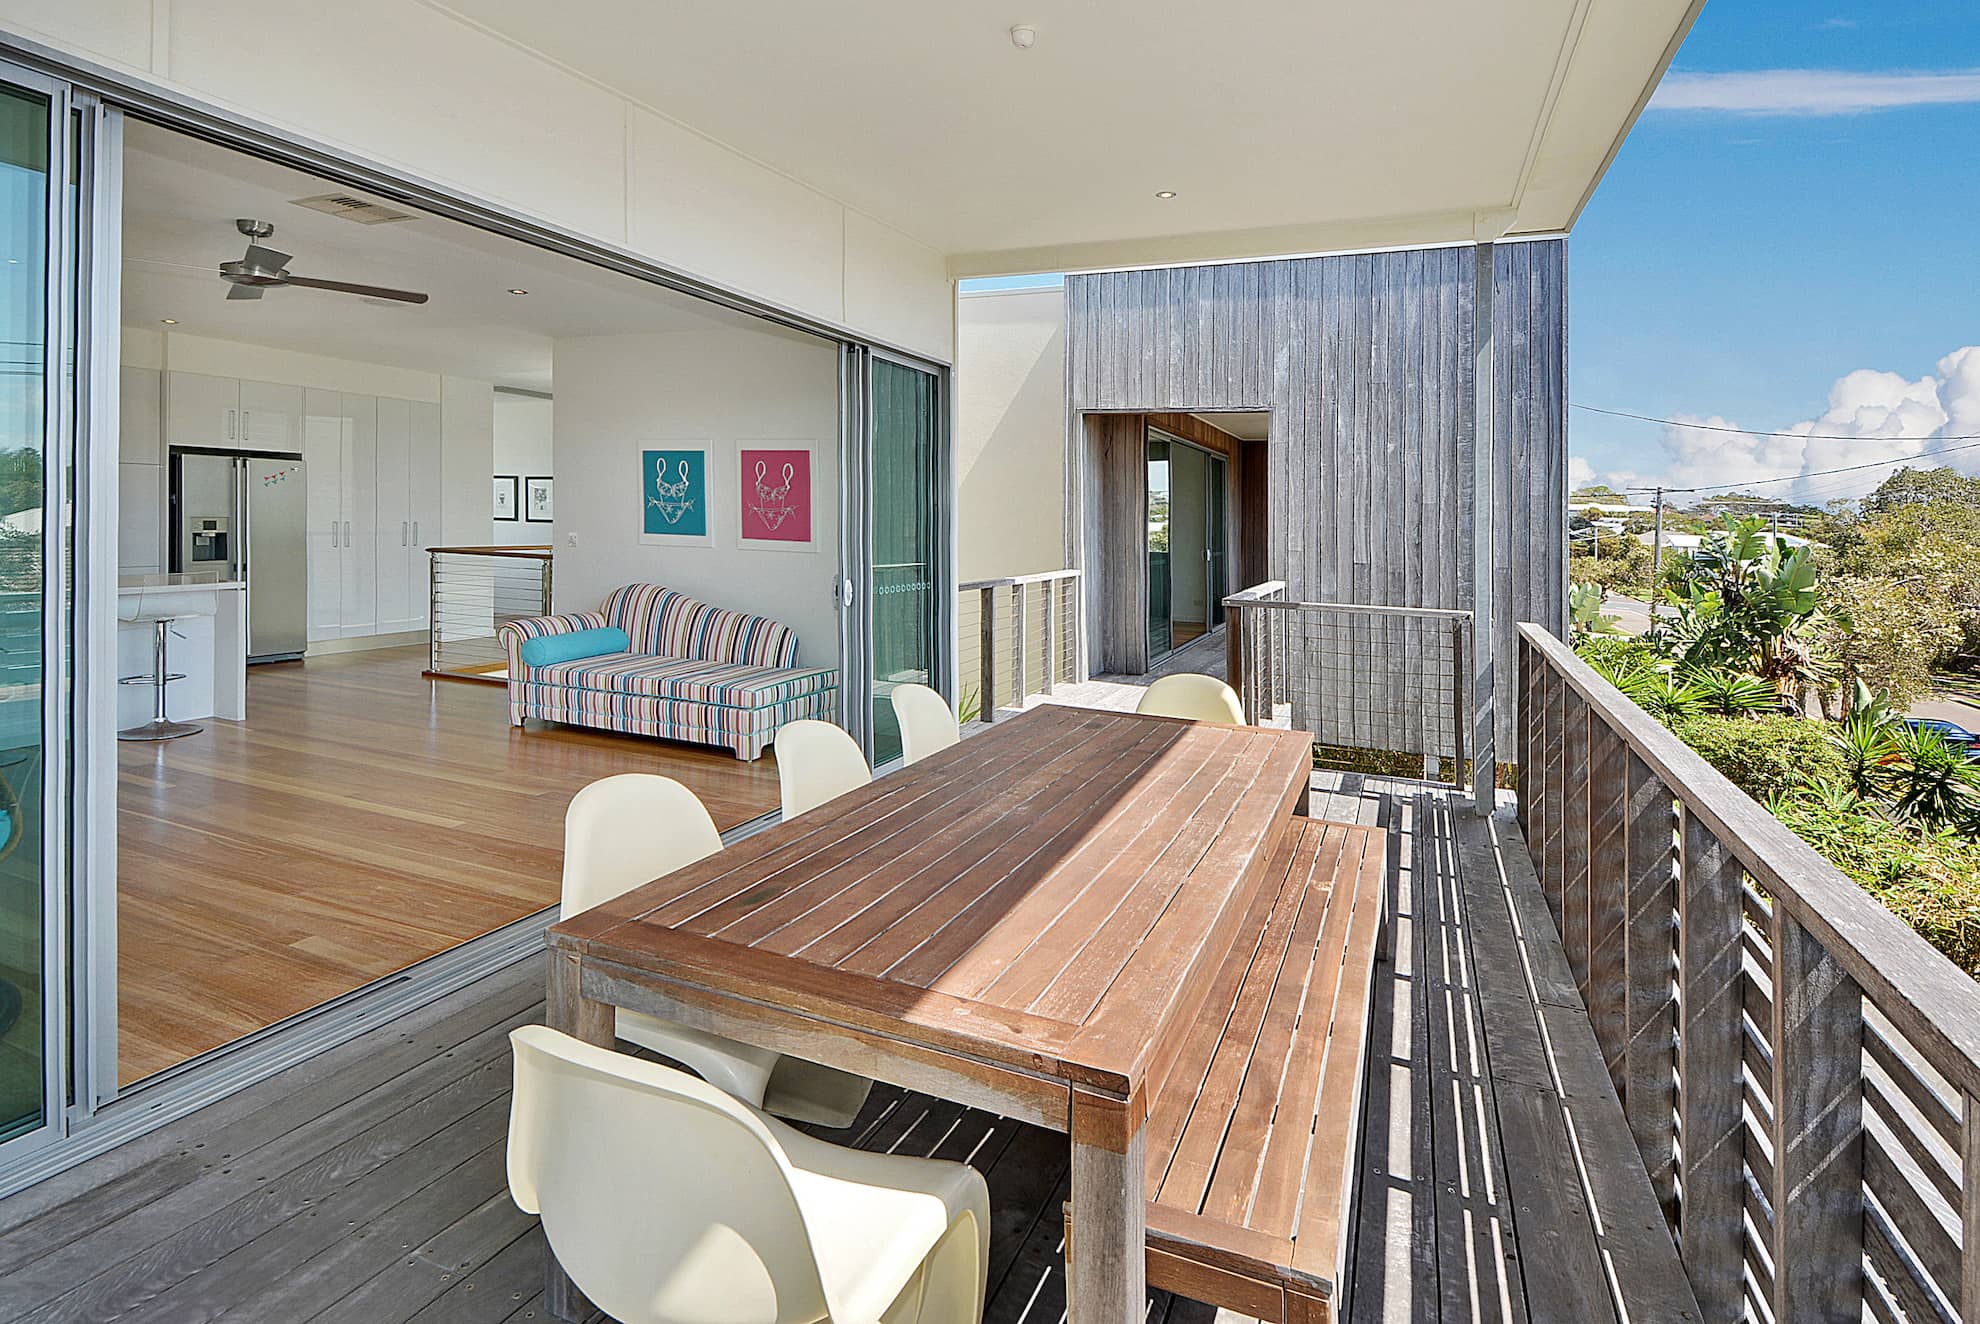 Mackay Street project by mdesign, a building design practice that operates on the Sunshine Coast.